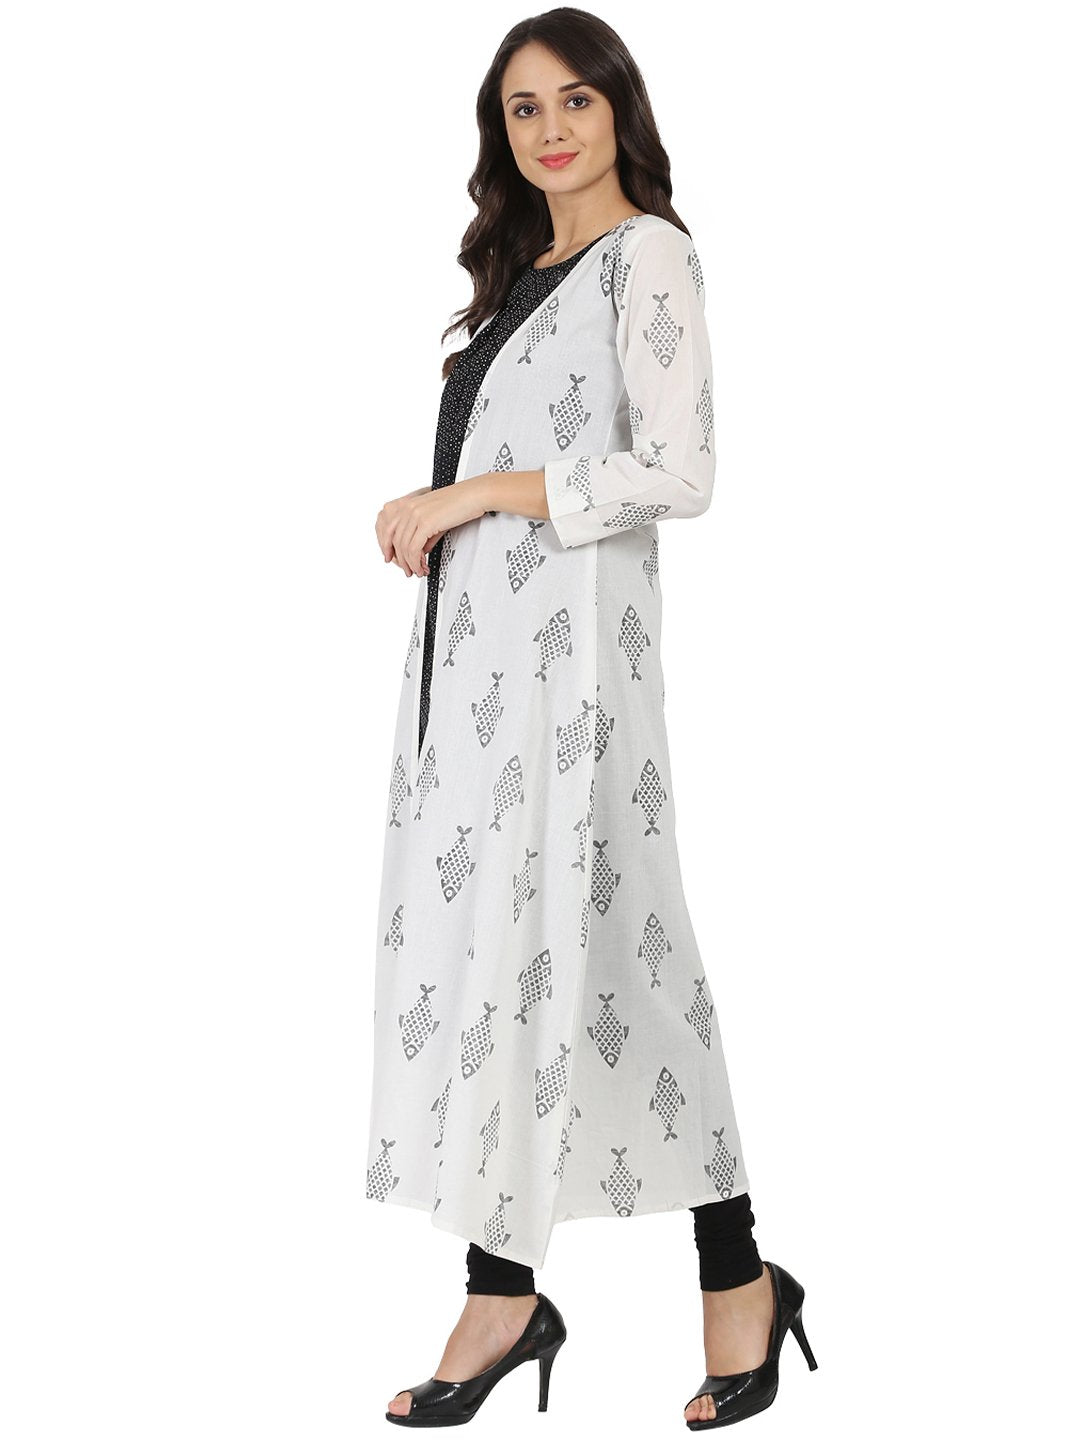 Women's Dark Grey Sleevelss Cotton A-Line Kurta With White Printed Long Jacket Open At Front - Nayo Clothing